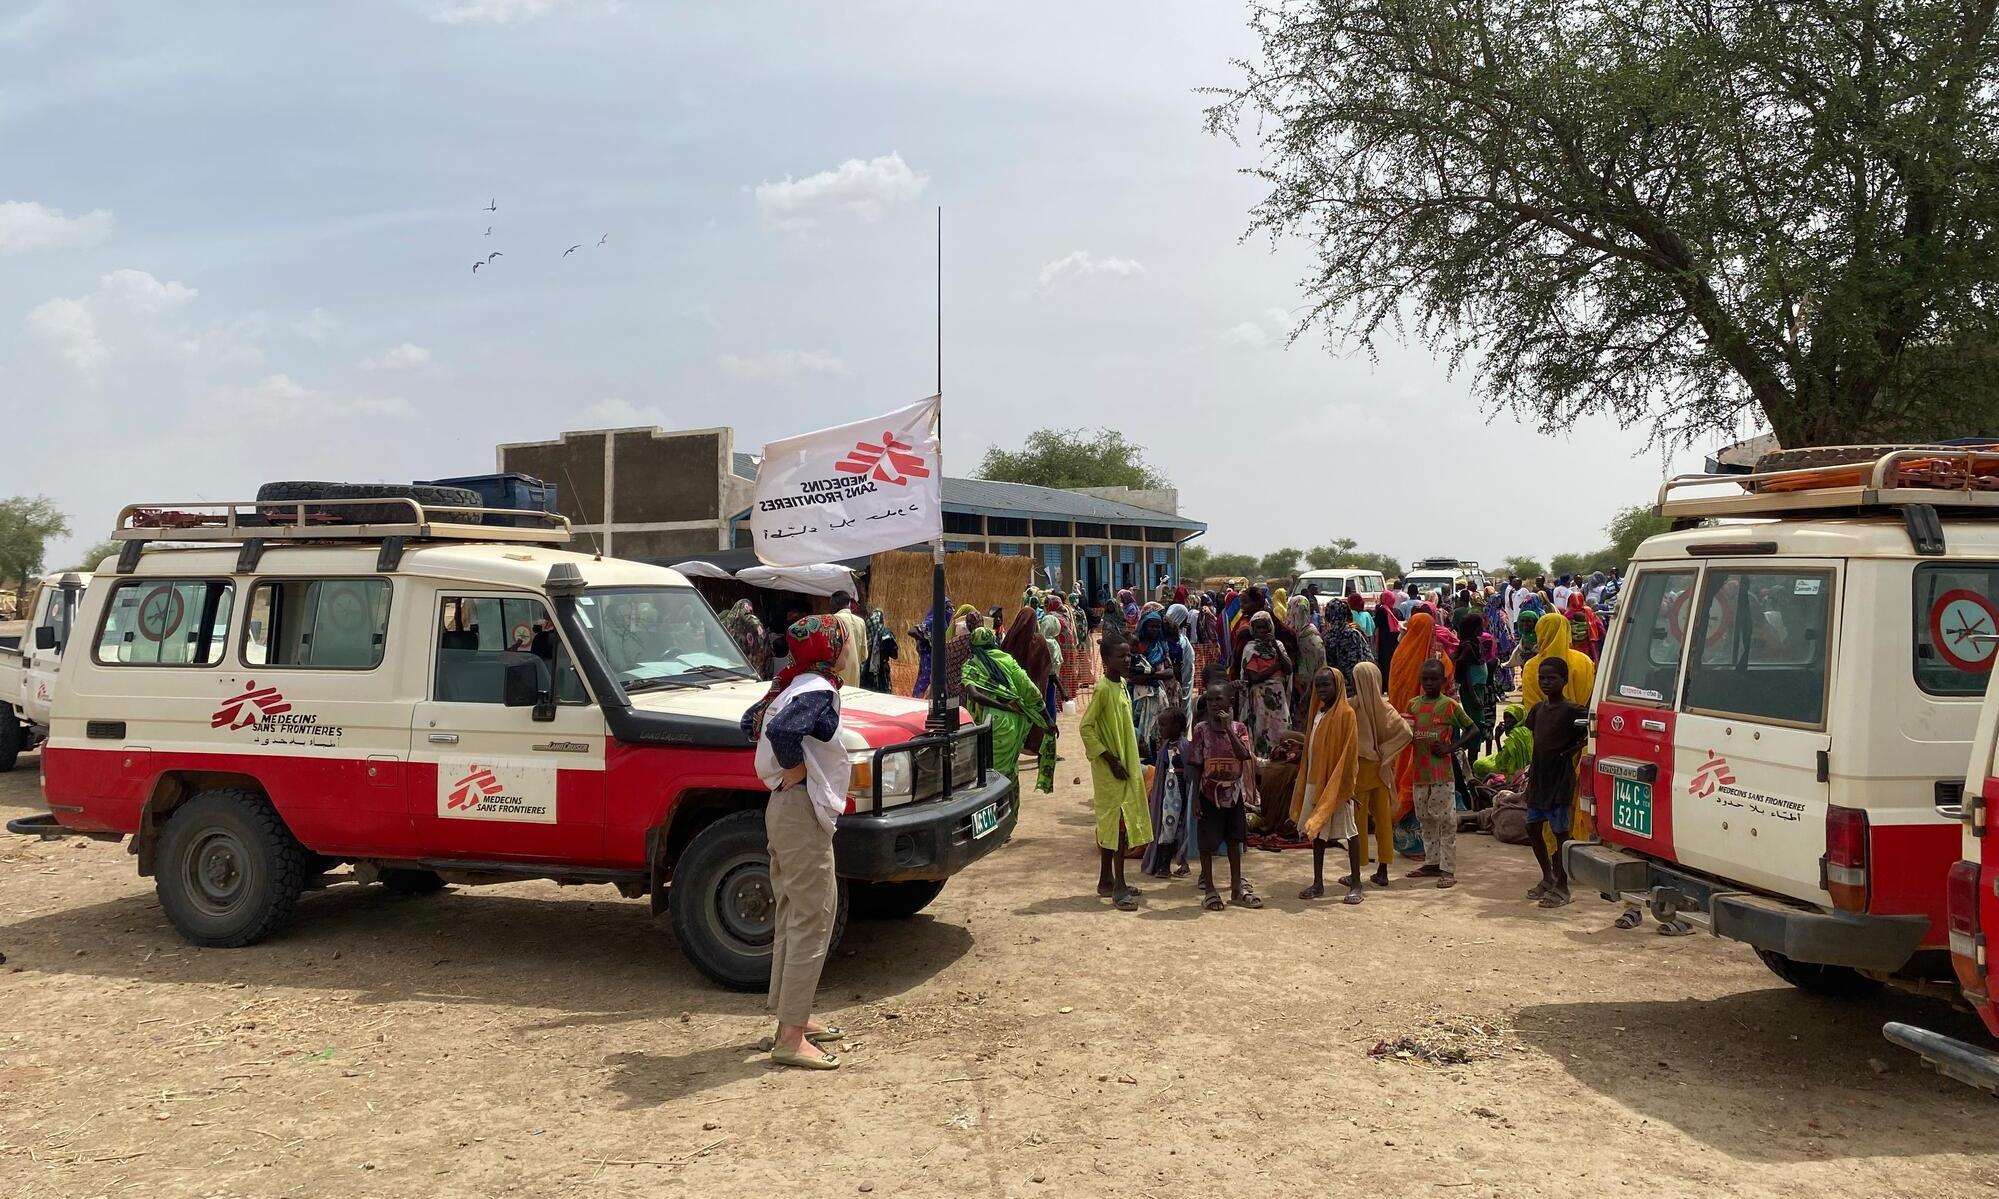 MSF trucks bring aid to Sudanese refugees at Andréssa school in Chad’s Sila province 